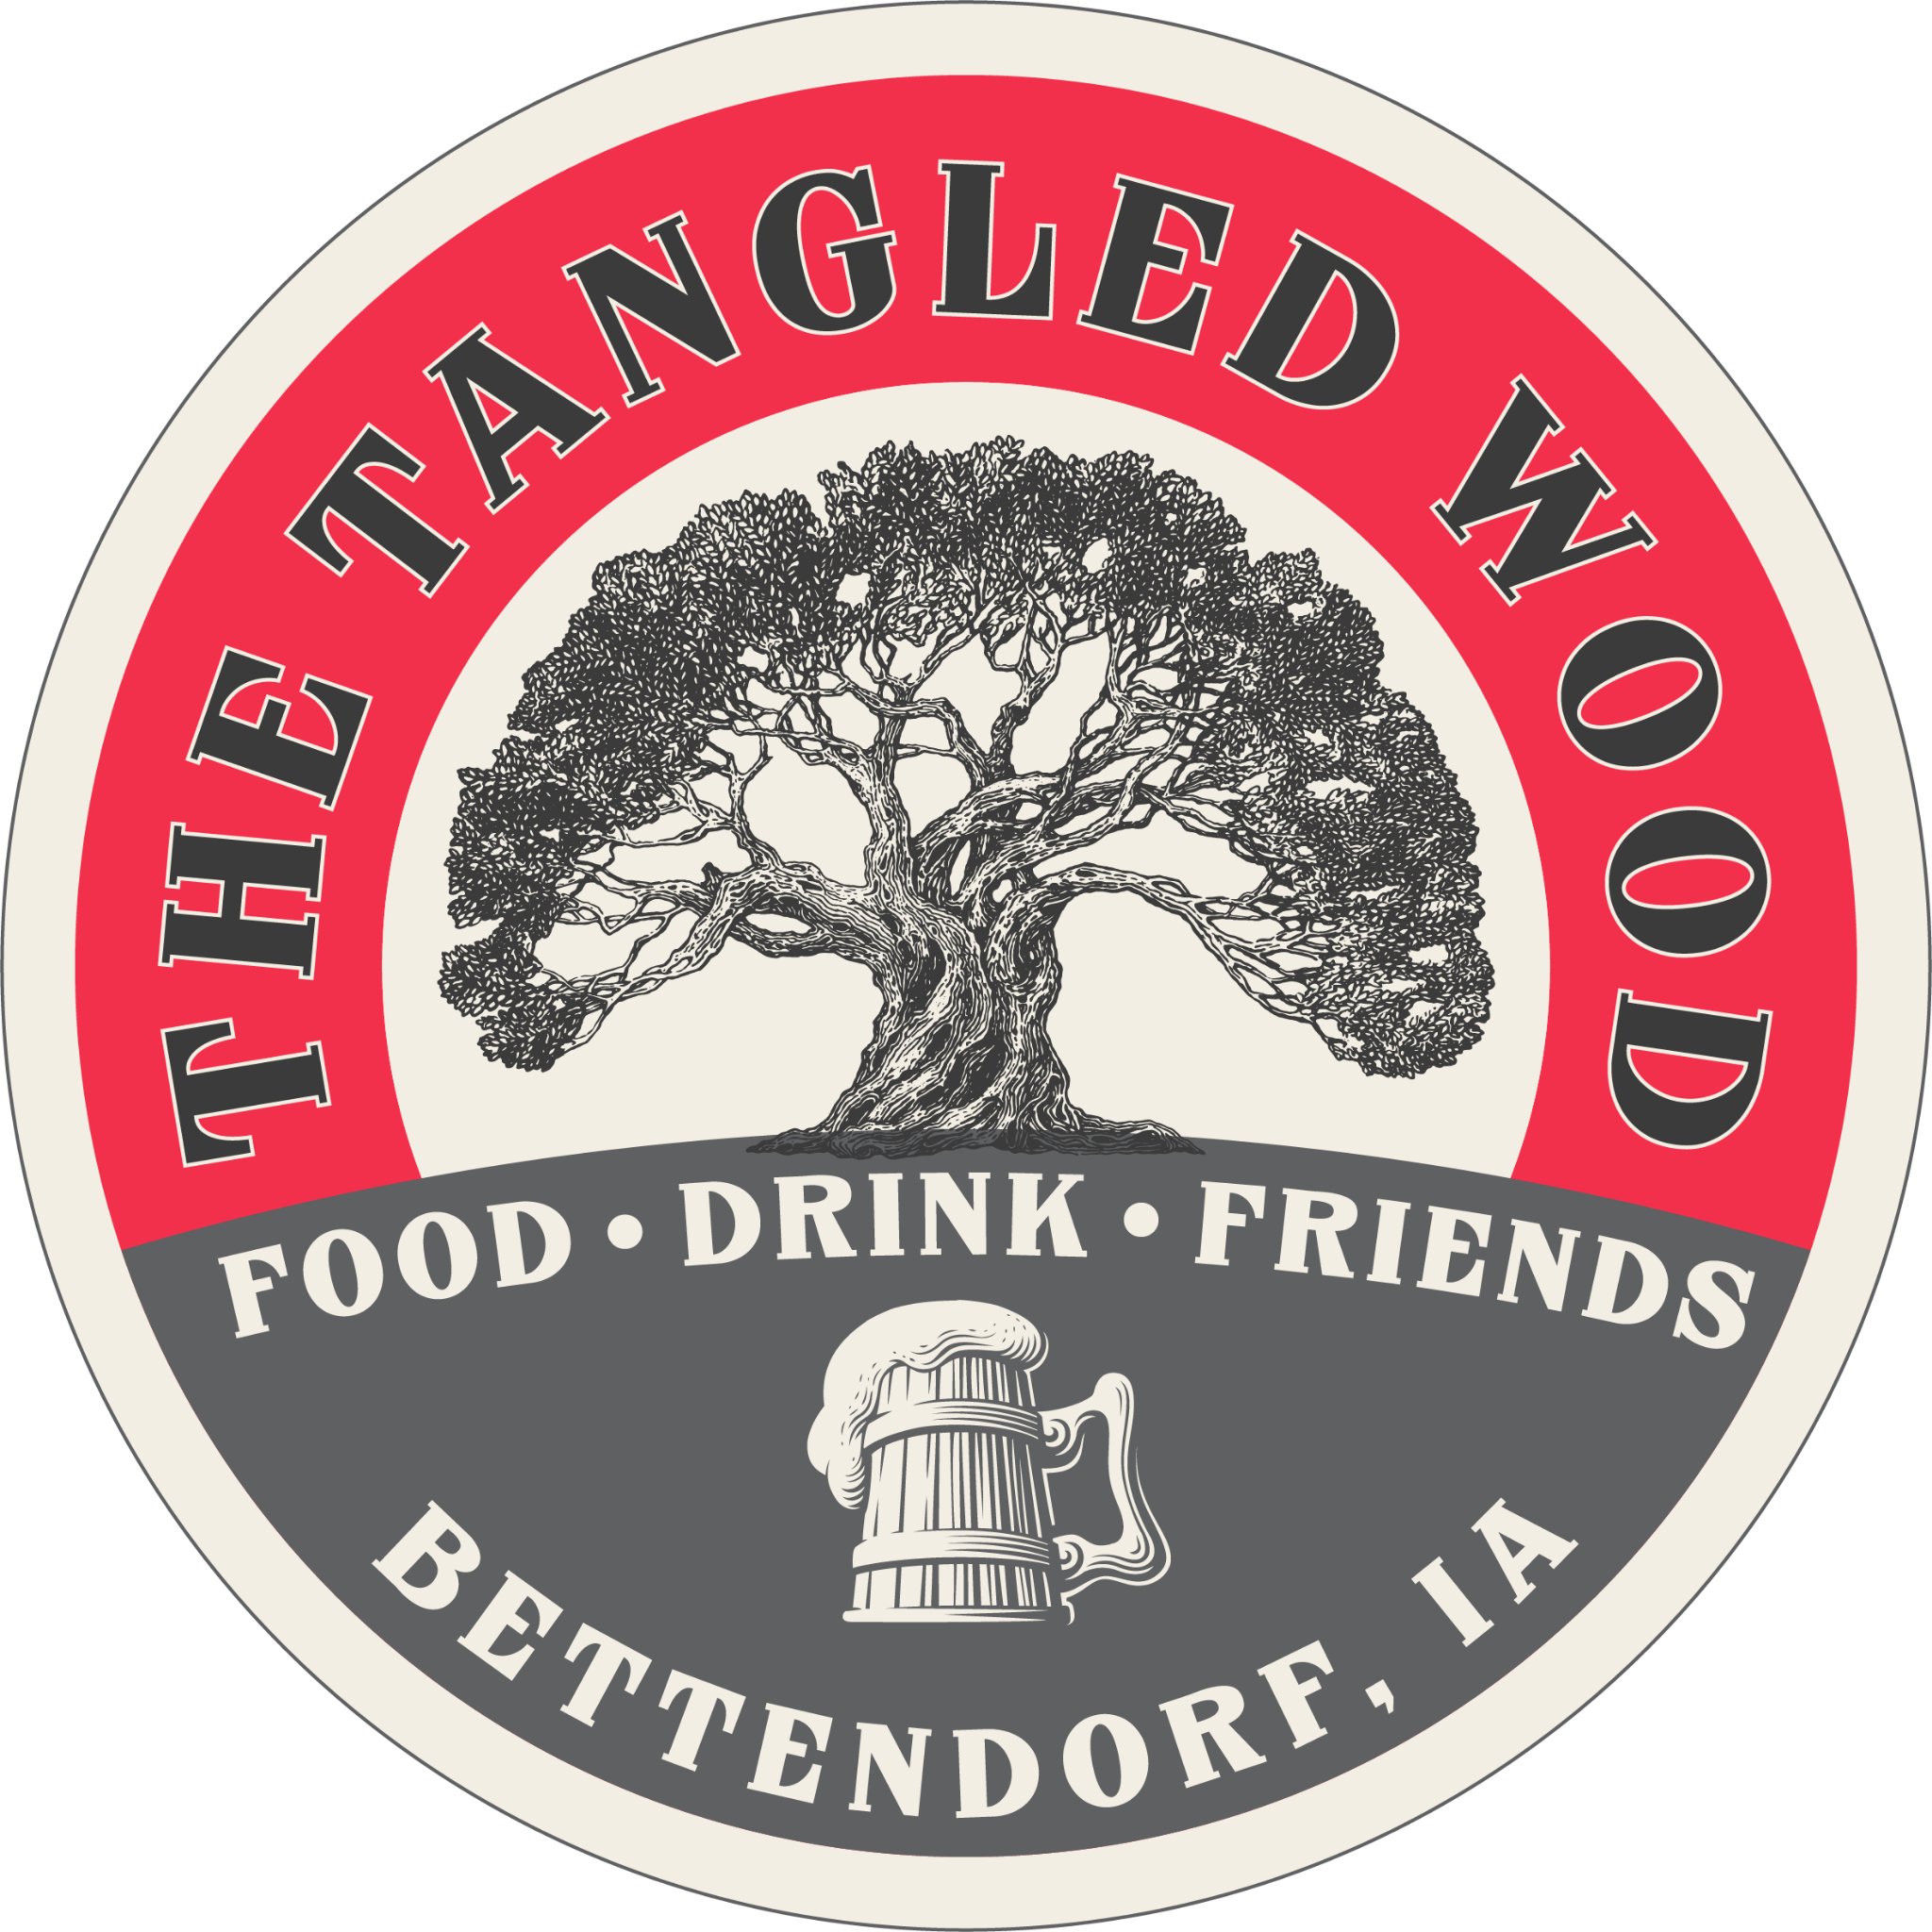 The Tangled Wood is a Bettendorf, Iowa gastropub located at 3636 Tanglewood Road. Your home for food, drinks and friends.